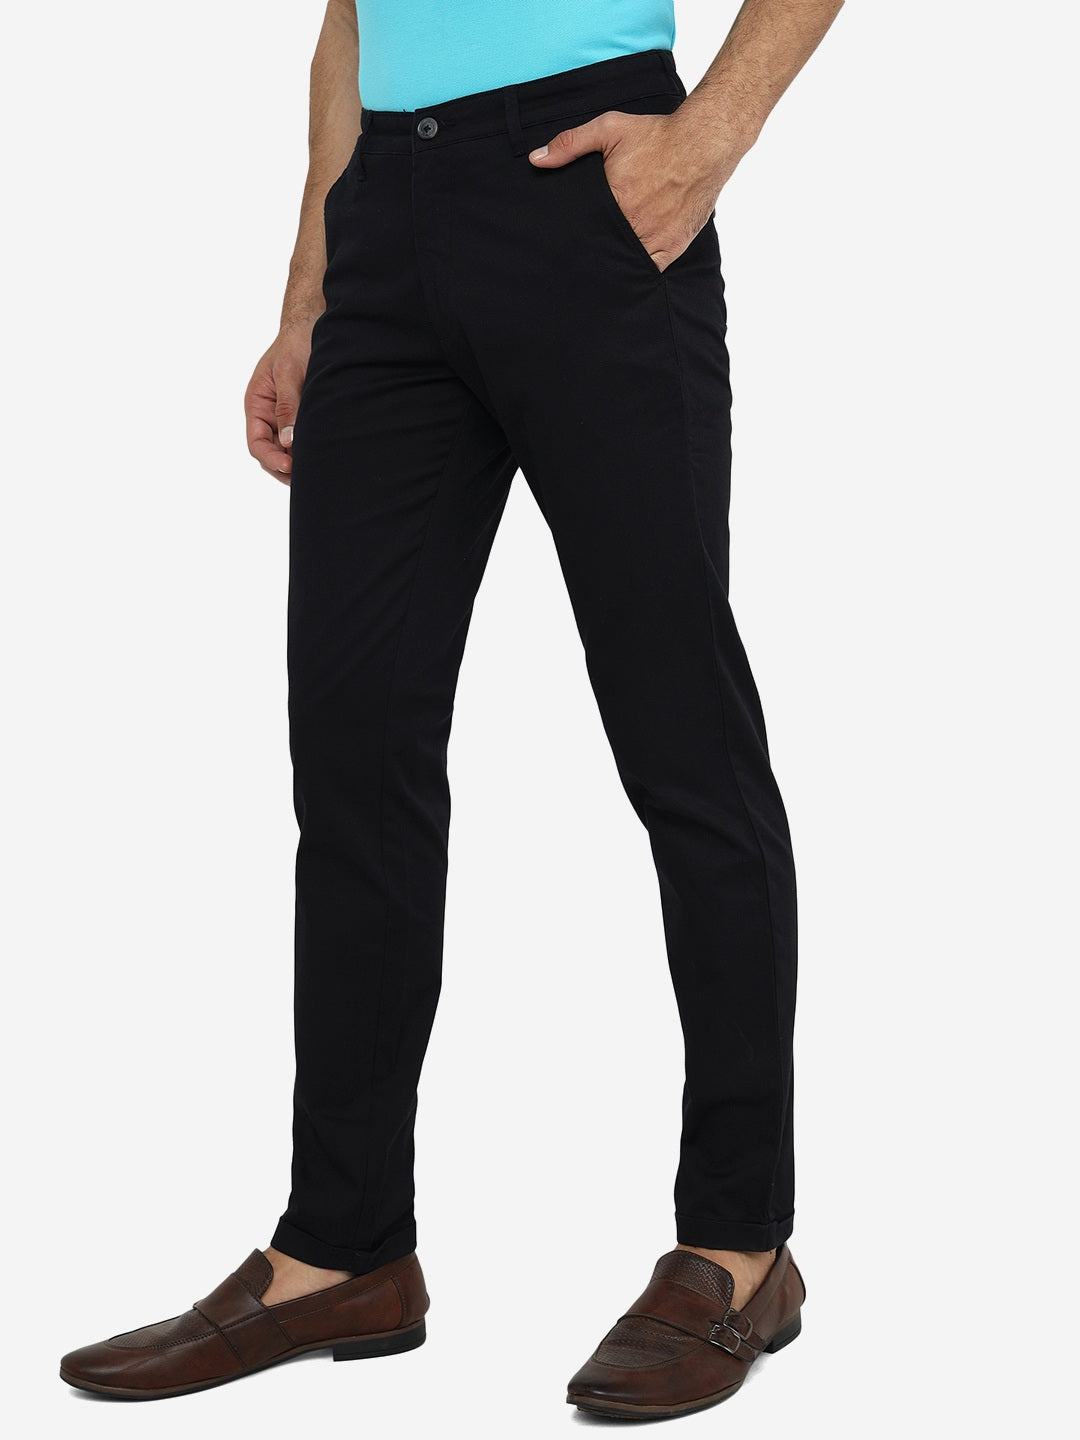 WeartoWork Our Neo-Fit trousers... - Park Avenue Style Up | Facebook